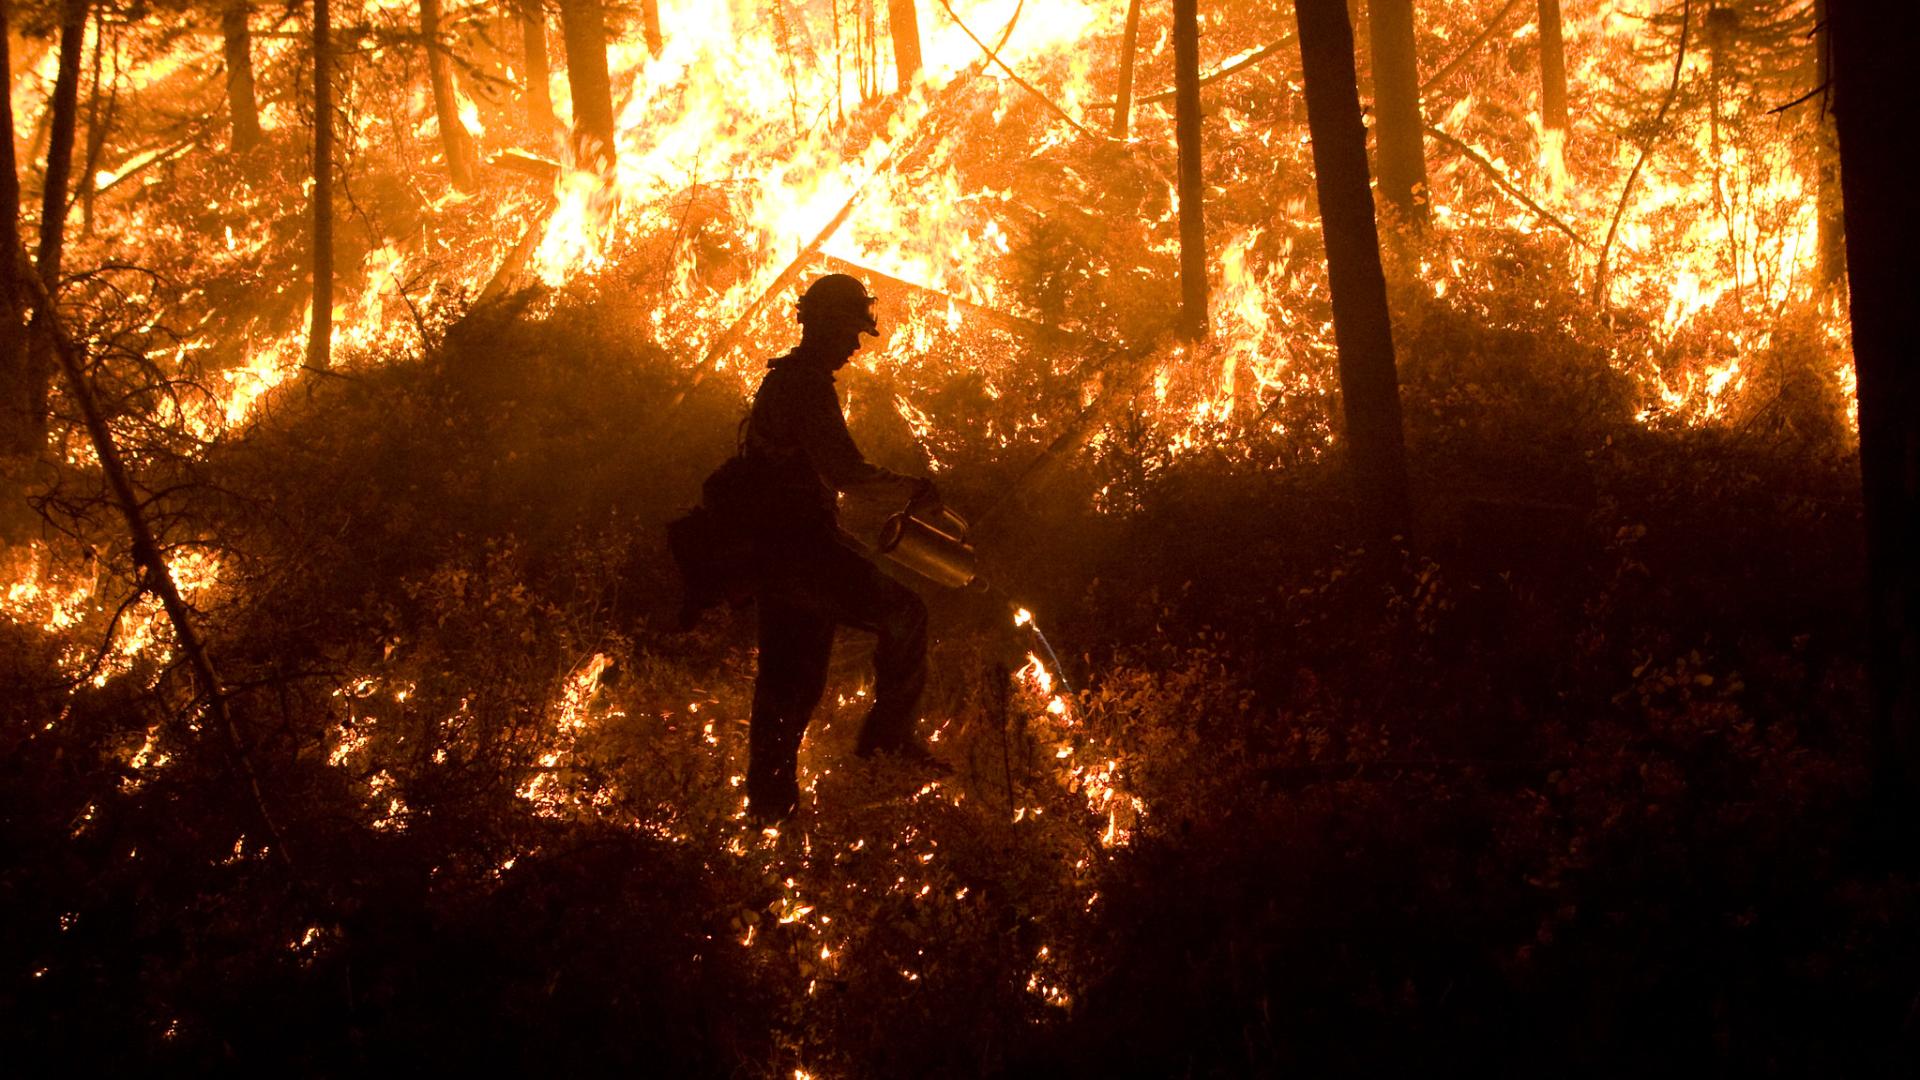 A firefighter lights small fires with a drip torch while walking through a burning forest at night